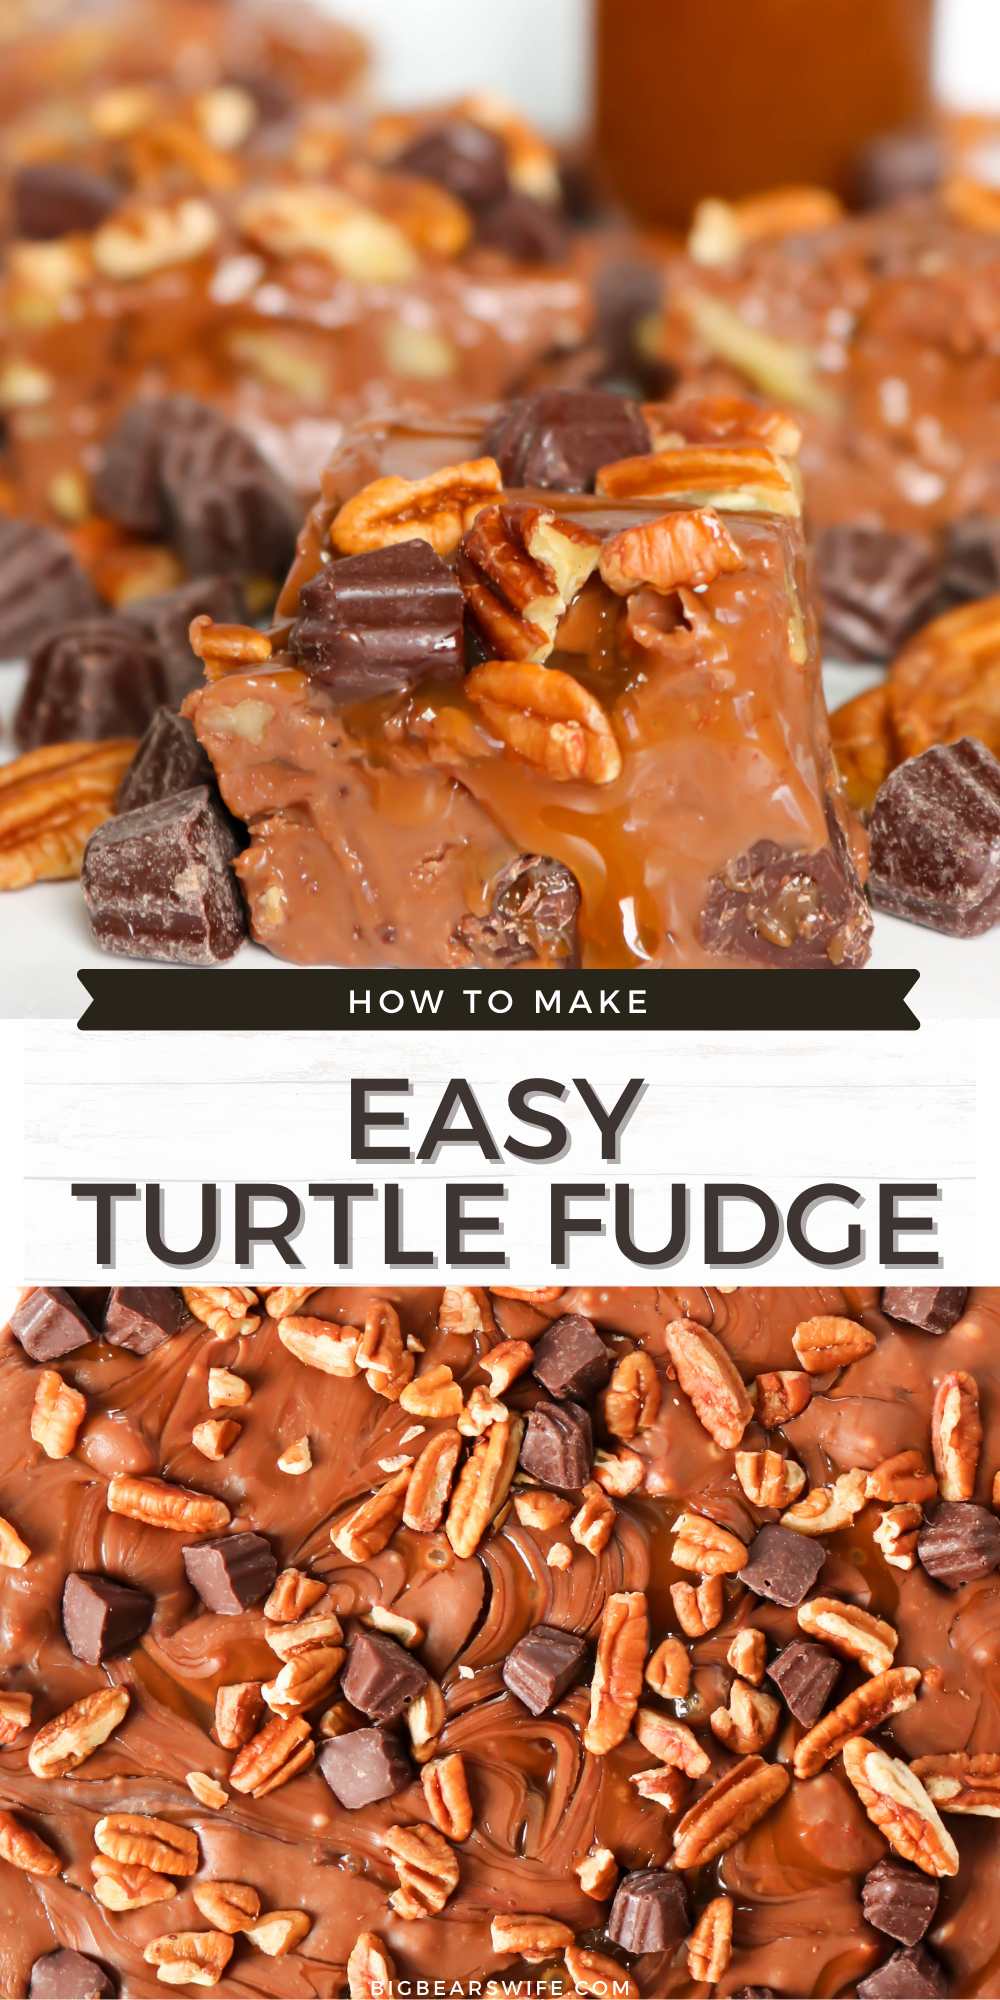 This Super Easy Turtle Fudge is a great dessert or a perfect homemade gift to make for a friend or family member! Super since to make and always delicious. This fudge is filled with chocolate, caramel and pecans!  via @bigbearswife